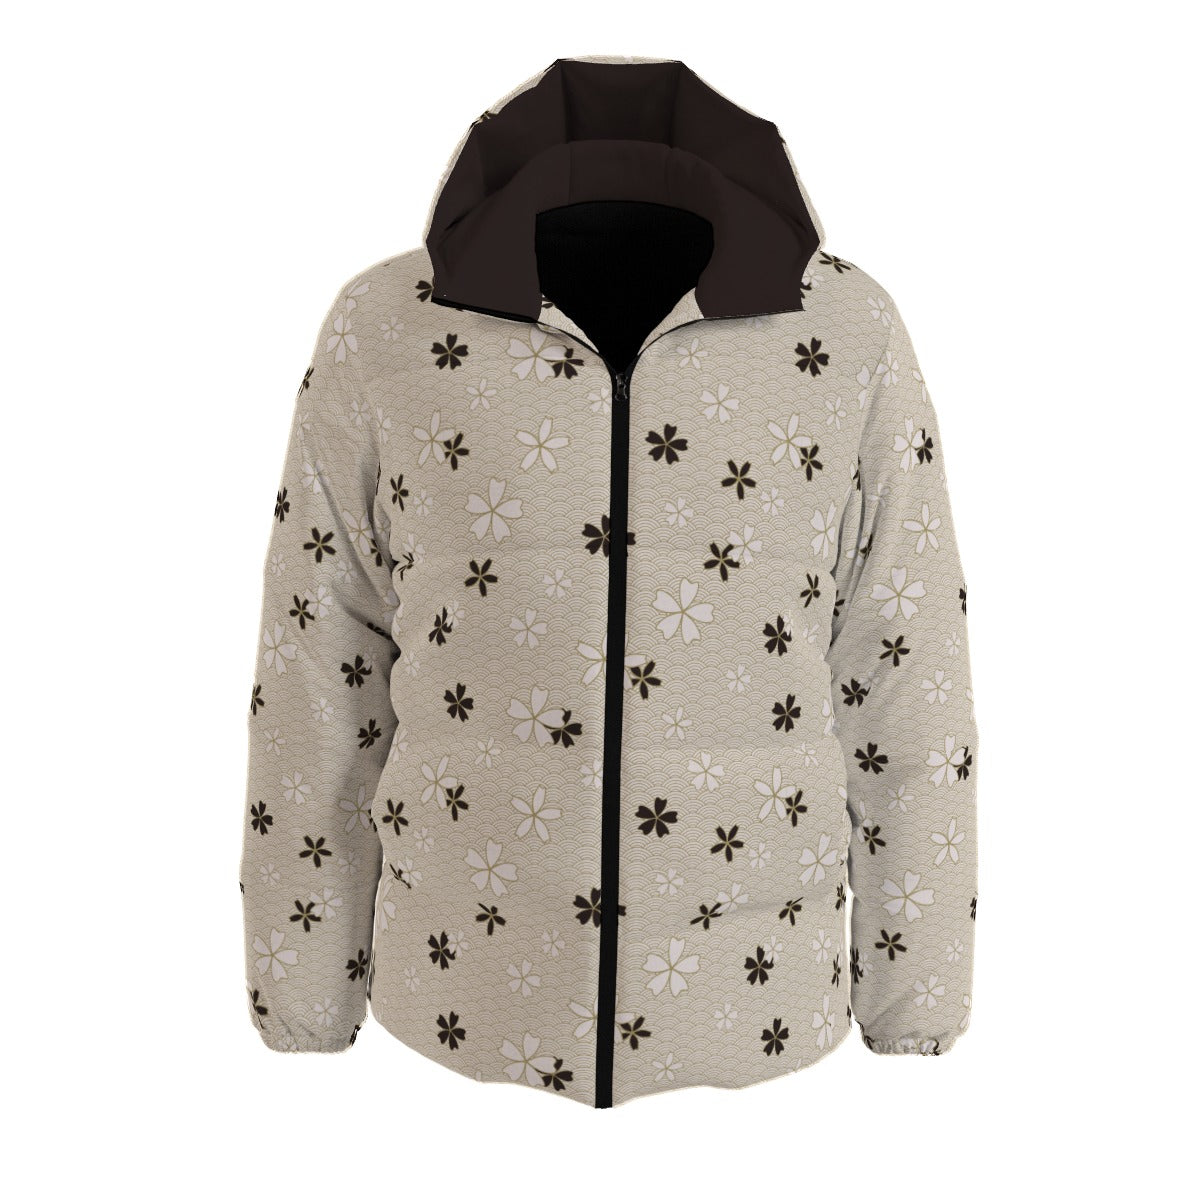 Ethical Duck Down Puffer Jacket in Japanese Snowflake